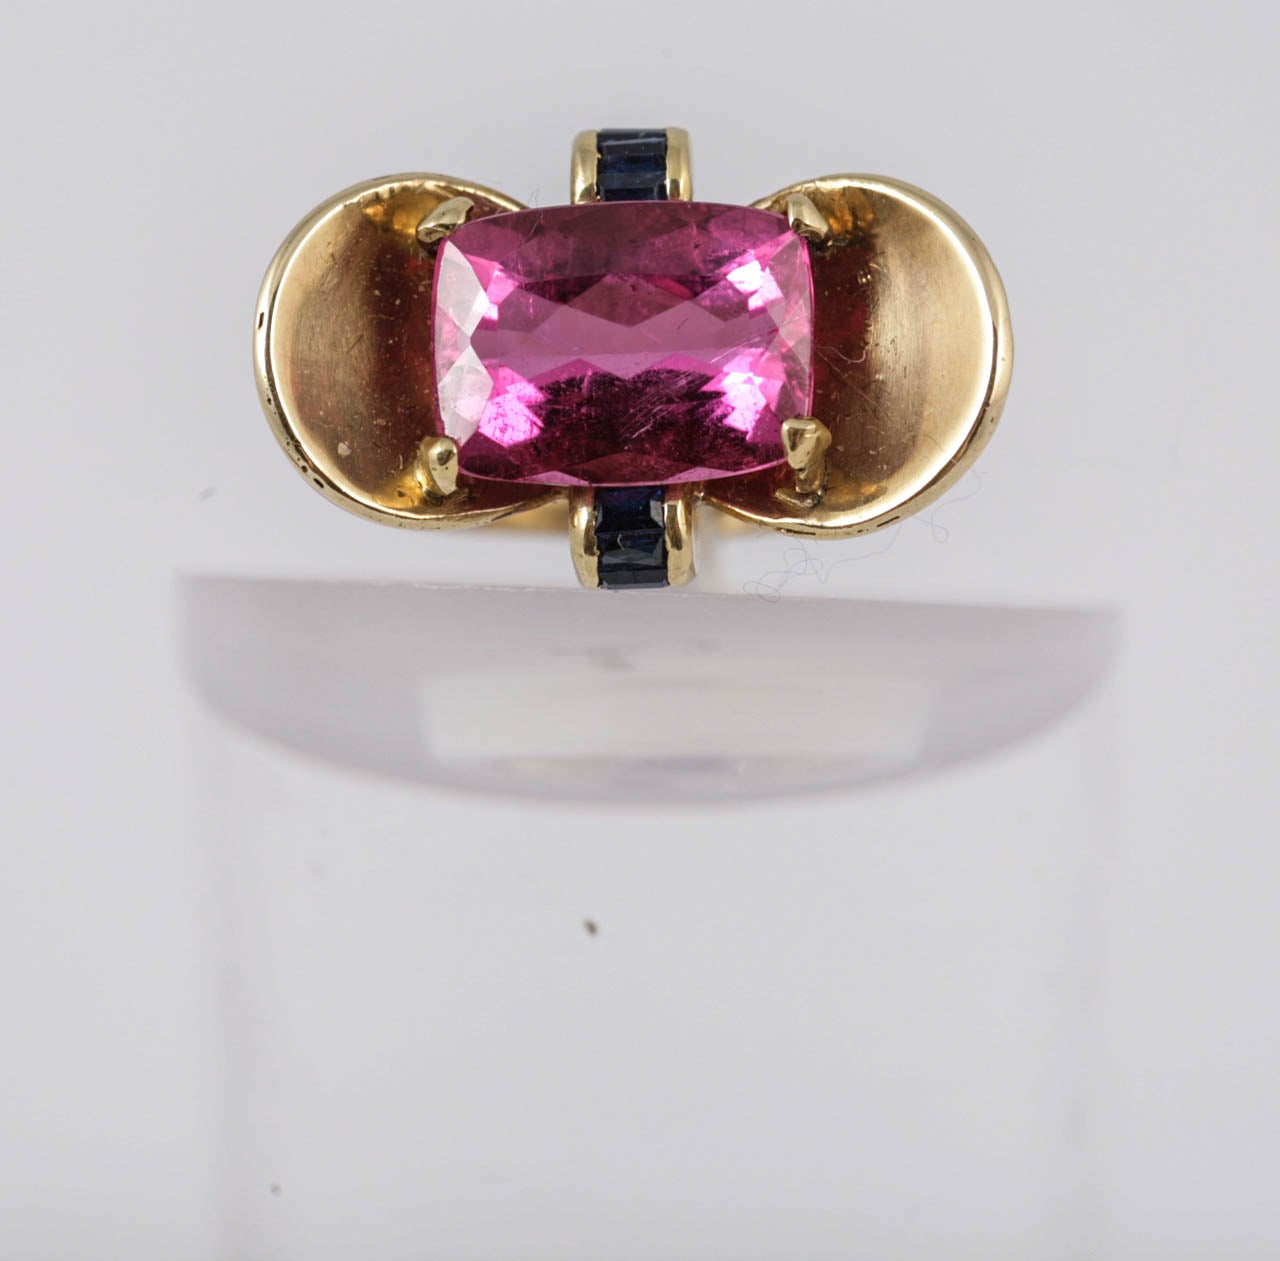 Pink Tourmaline with Sapphire accents set in 18K Gold.